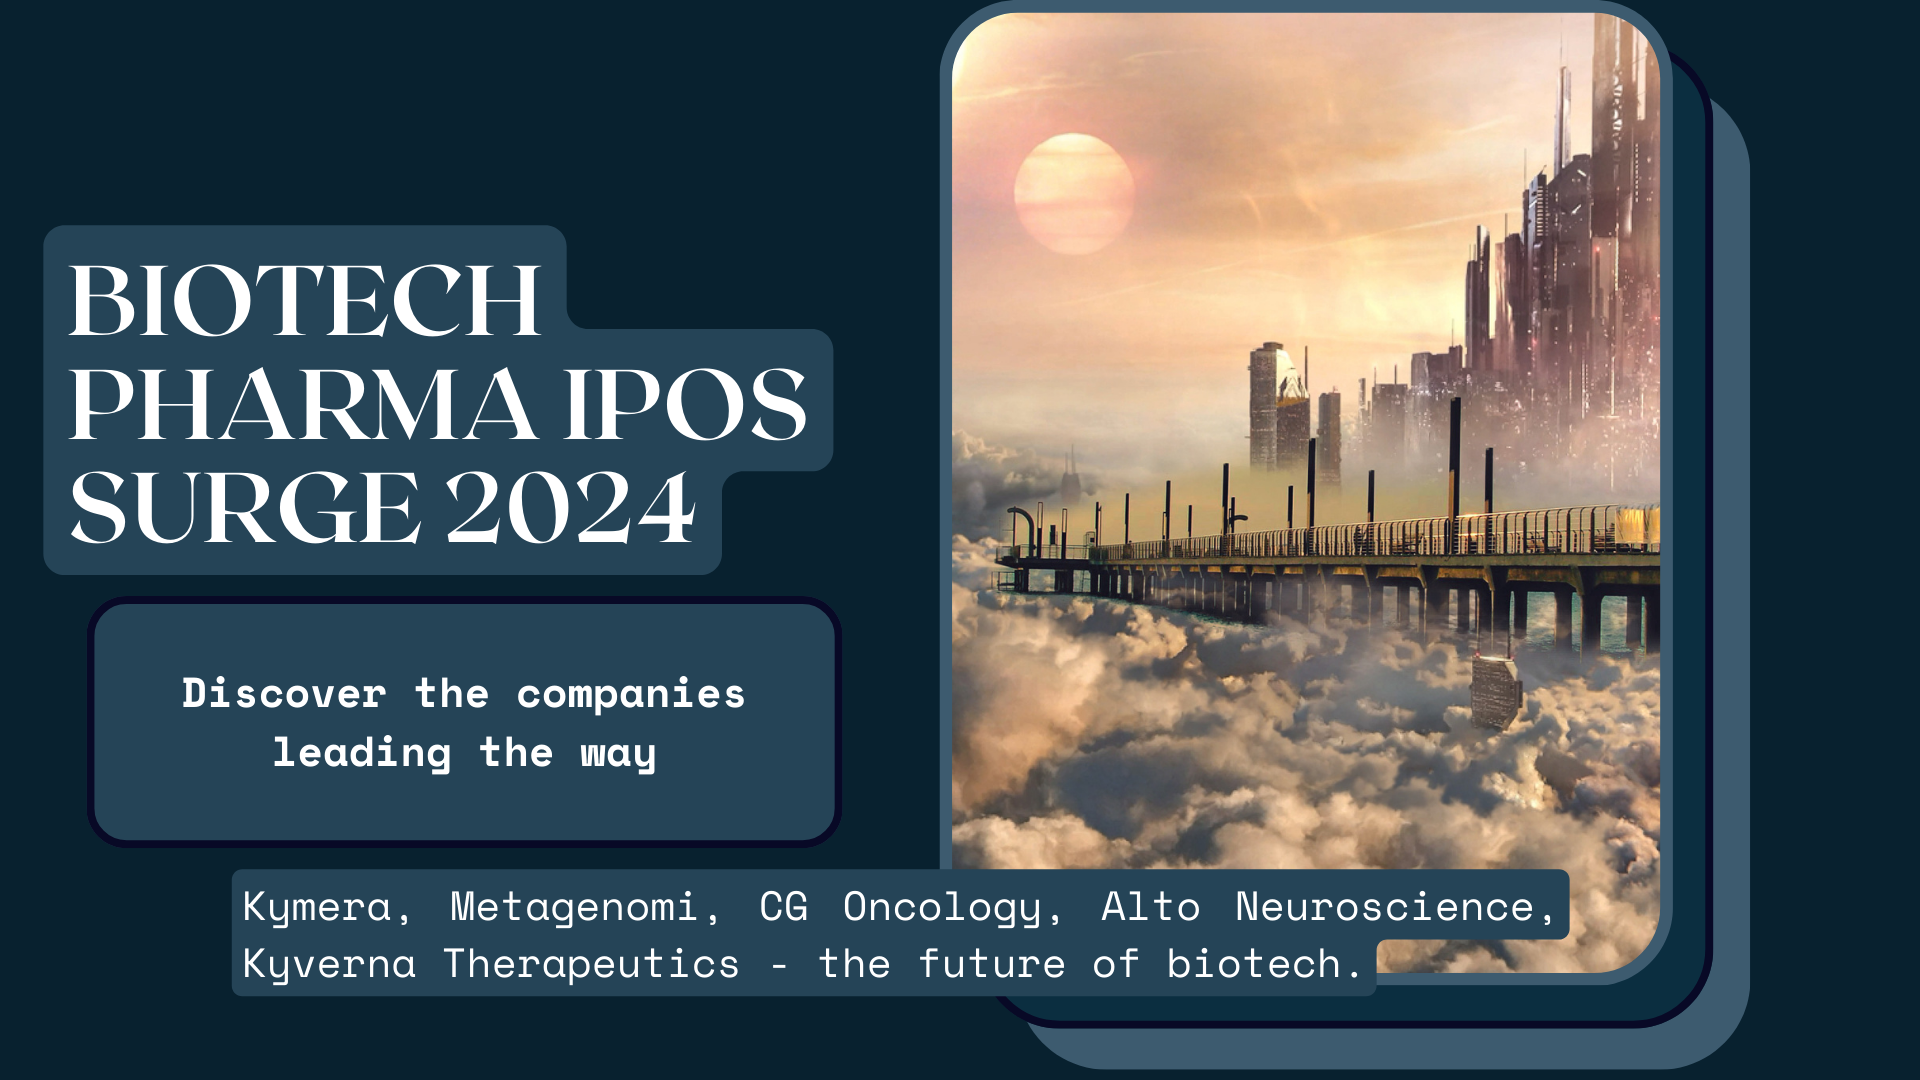 Biotech and Pharma IPOs Surge with Innovative Therapies in the